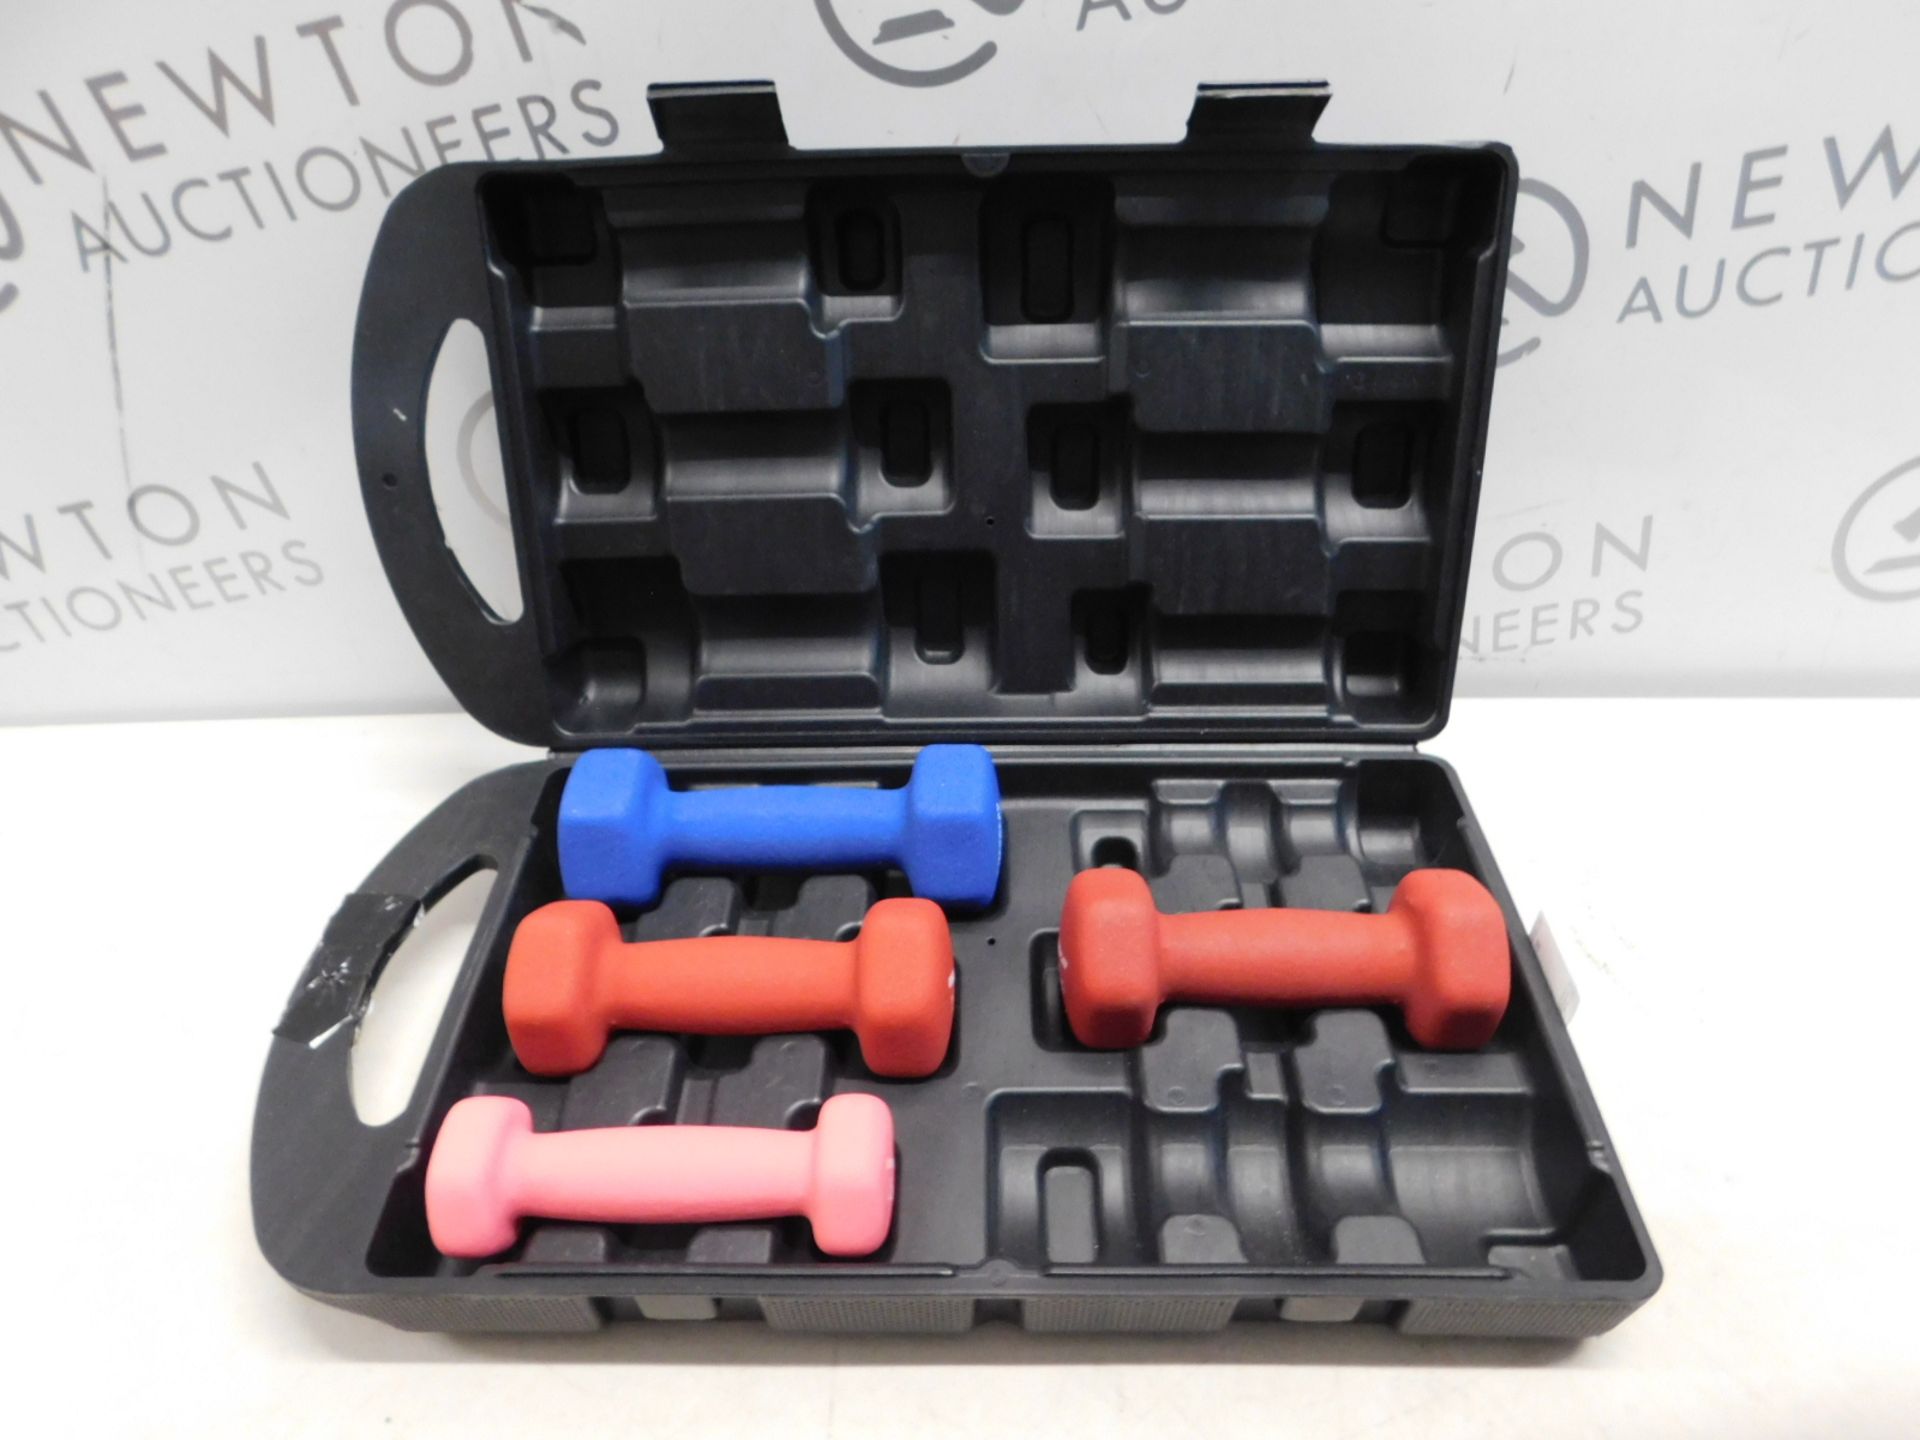 1 QUICKPLAY FITNESS DUMBELLS HAND WEIGHTS SET WITH CARRY CASE RRP Â£39 (4 IN BOX)